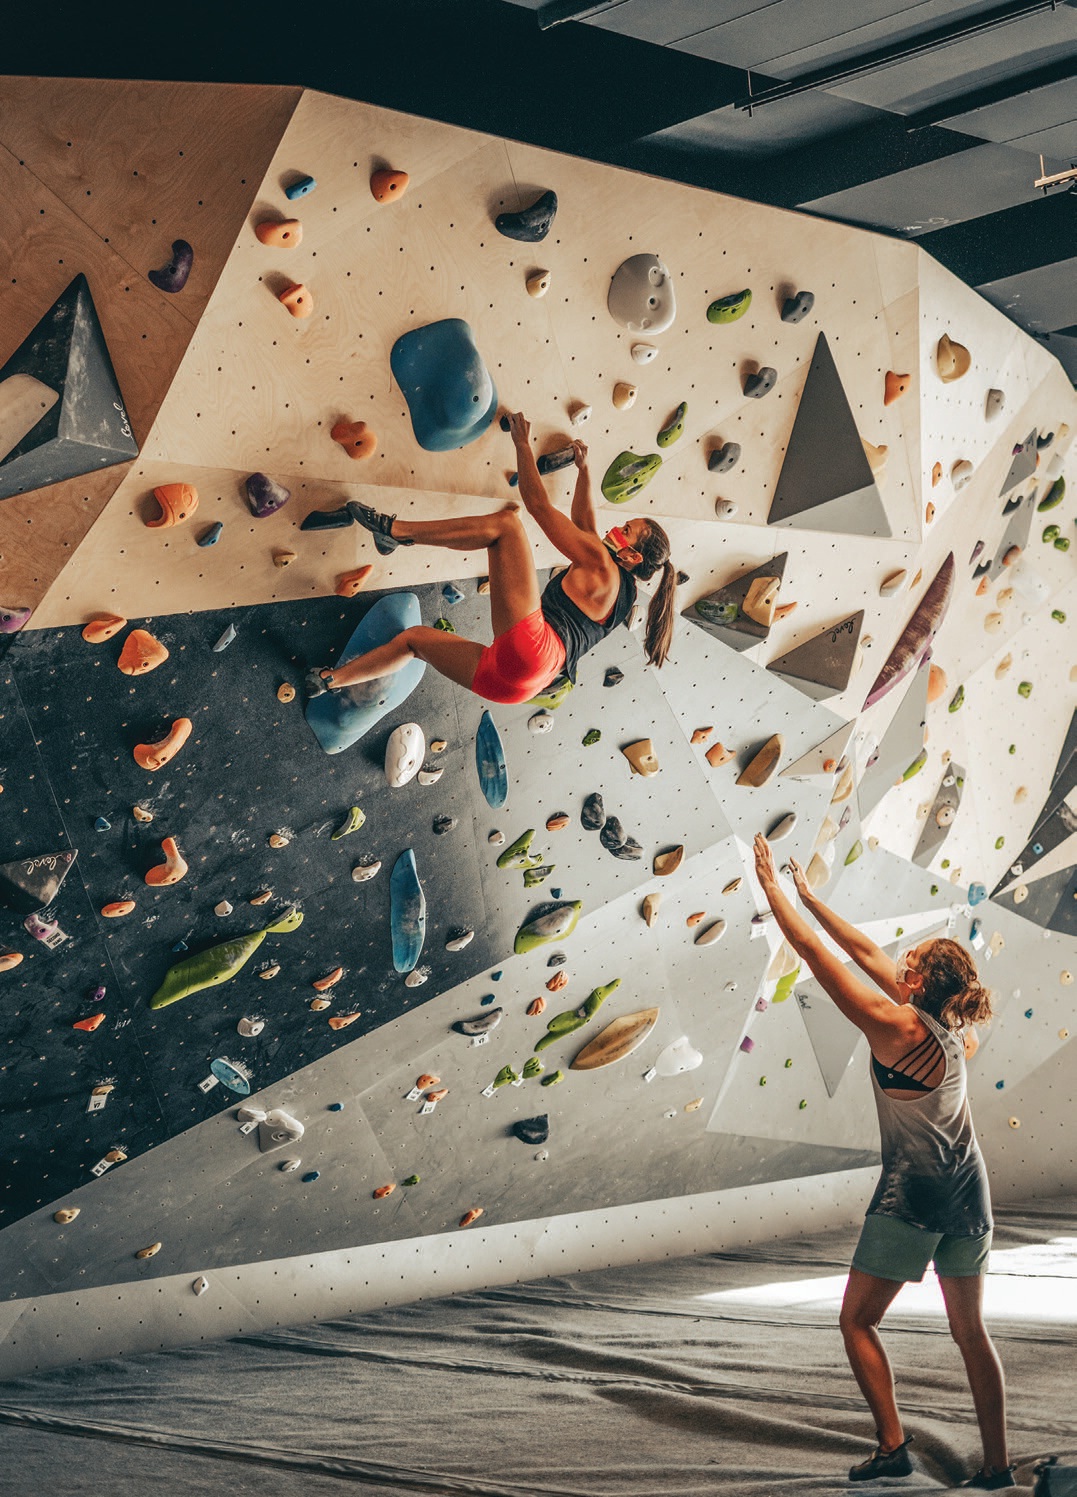  Benchmark Climbing offers a fun fitness experience for climbers of all skill levels. PHOTO COURTESY OF RBANDS